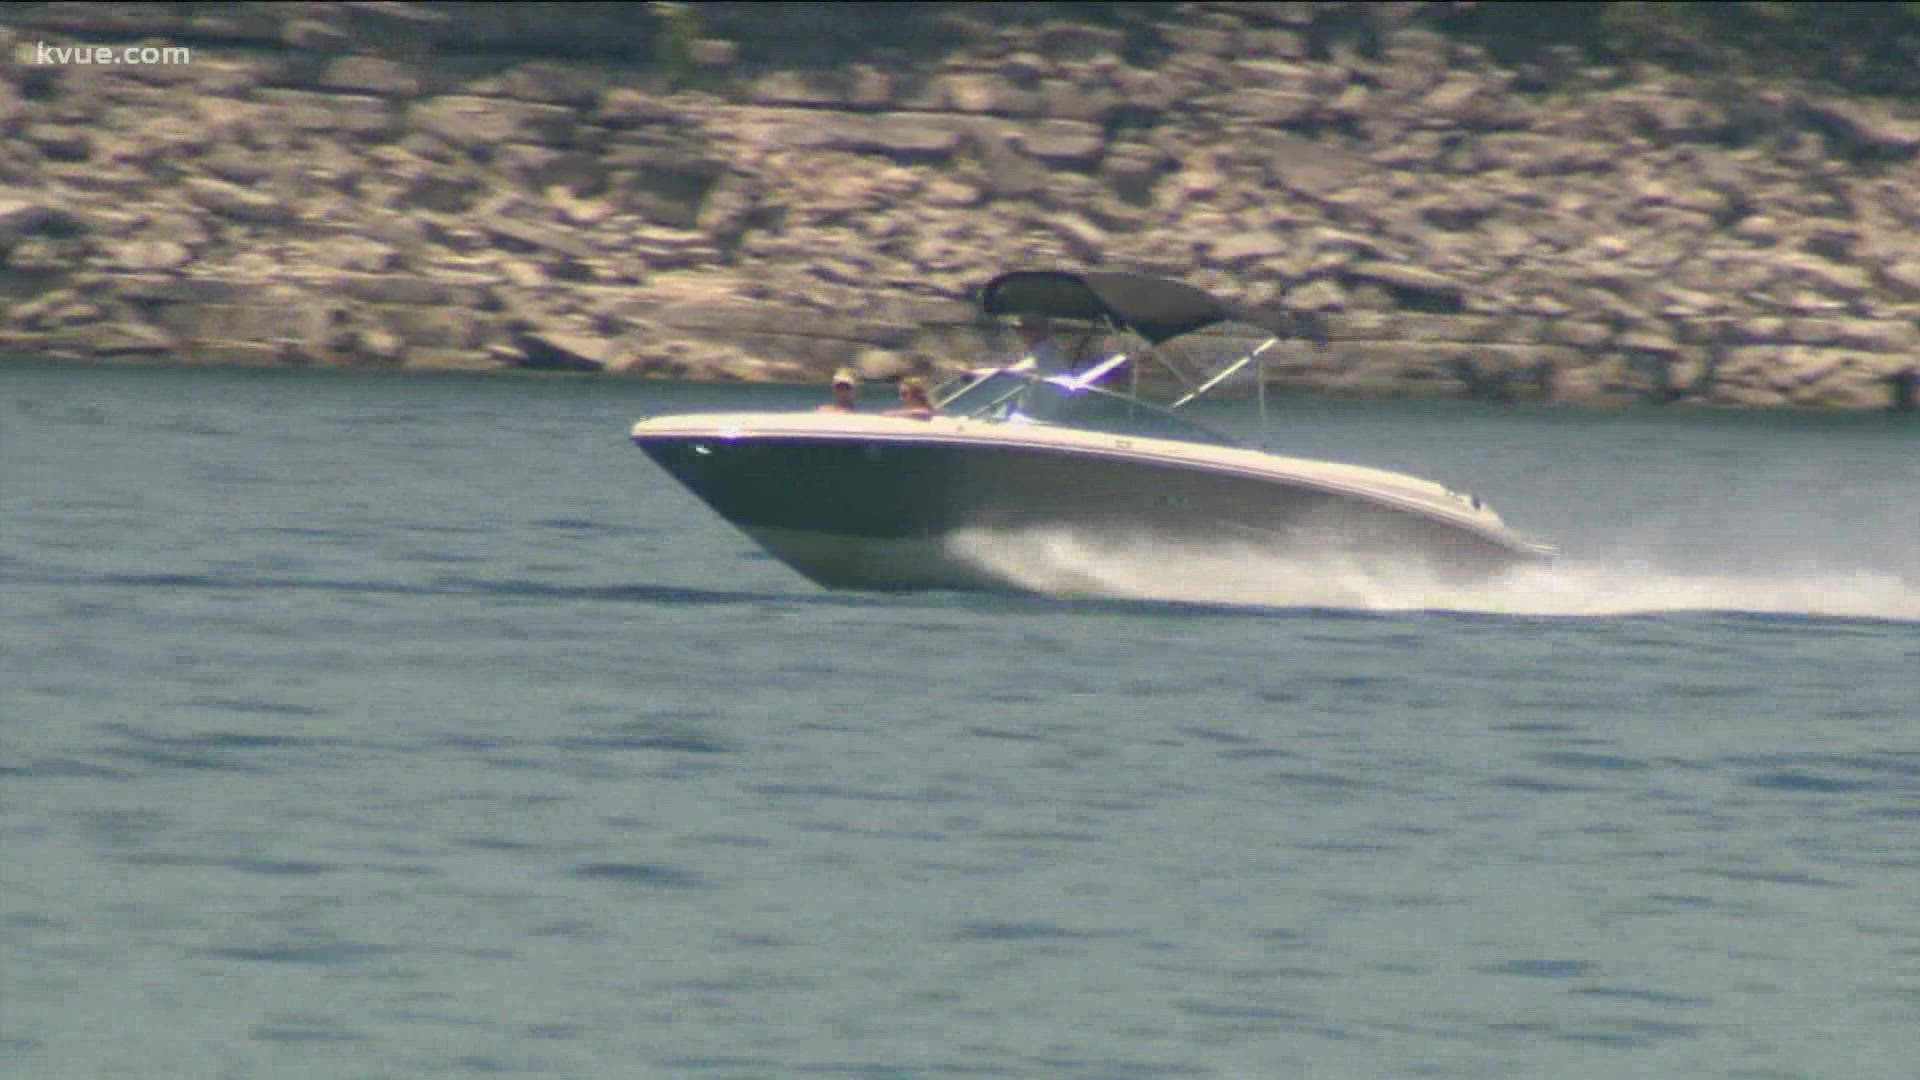 This holiday weekend, there is a ban on personal motorized watercraft on Lake Austin.